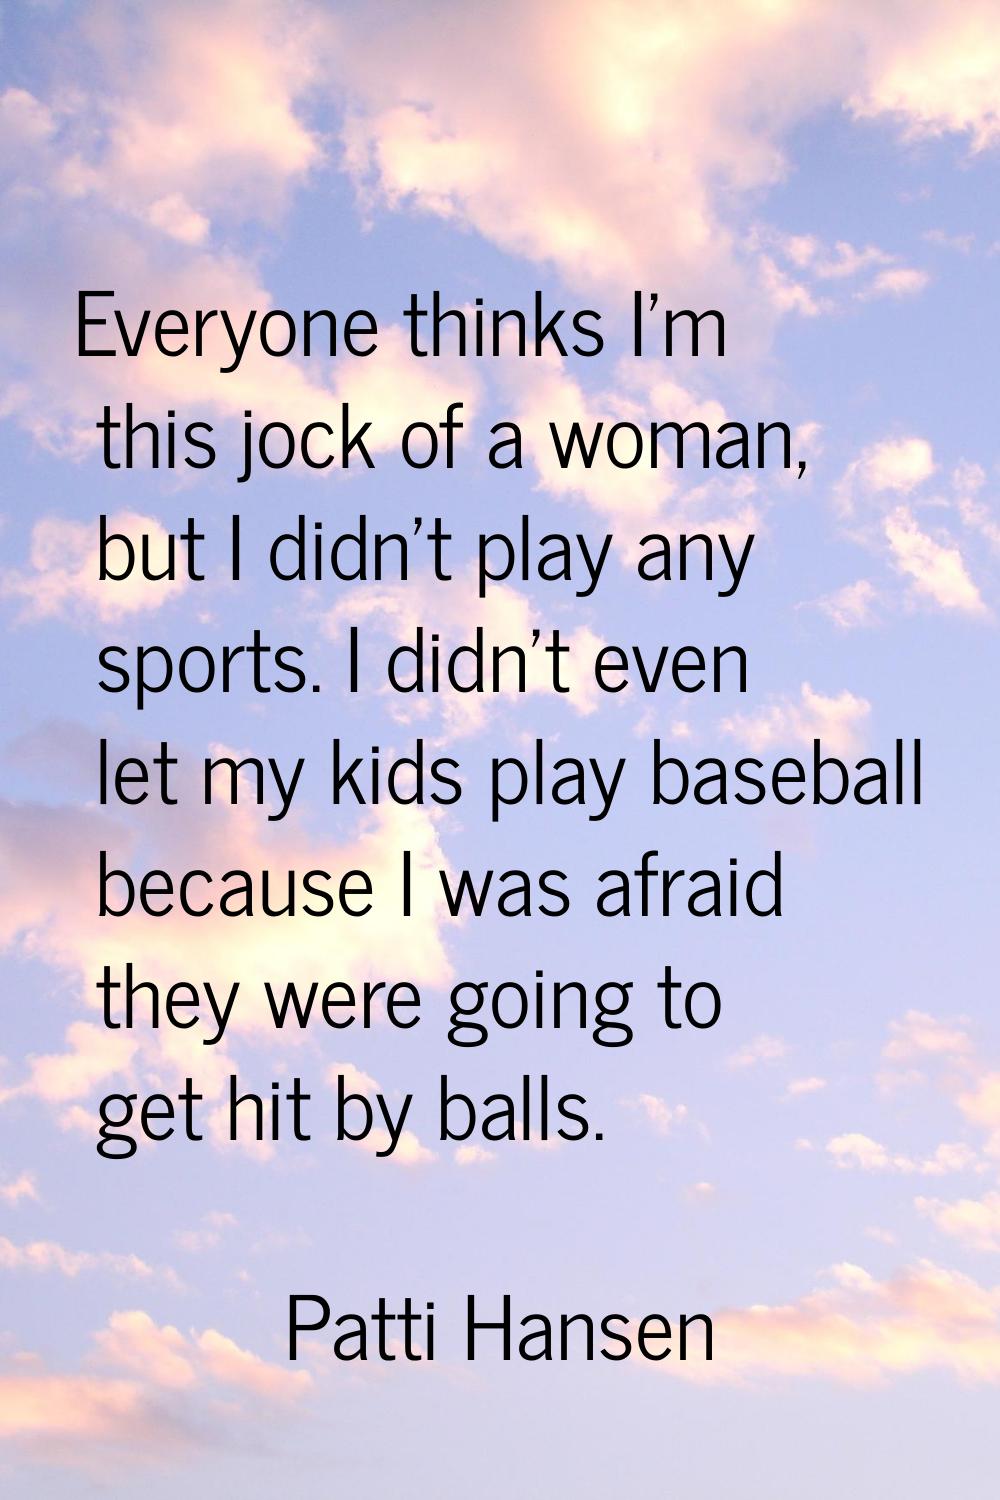 Everyone thinks I'm this jock of a woman, but I didn't play any sports. I didn't even let my kids p